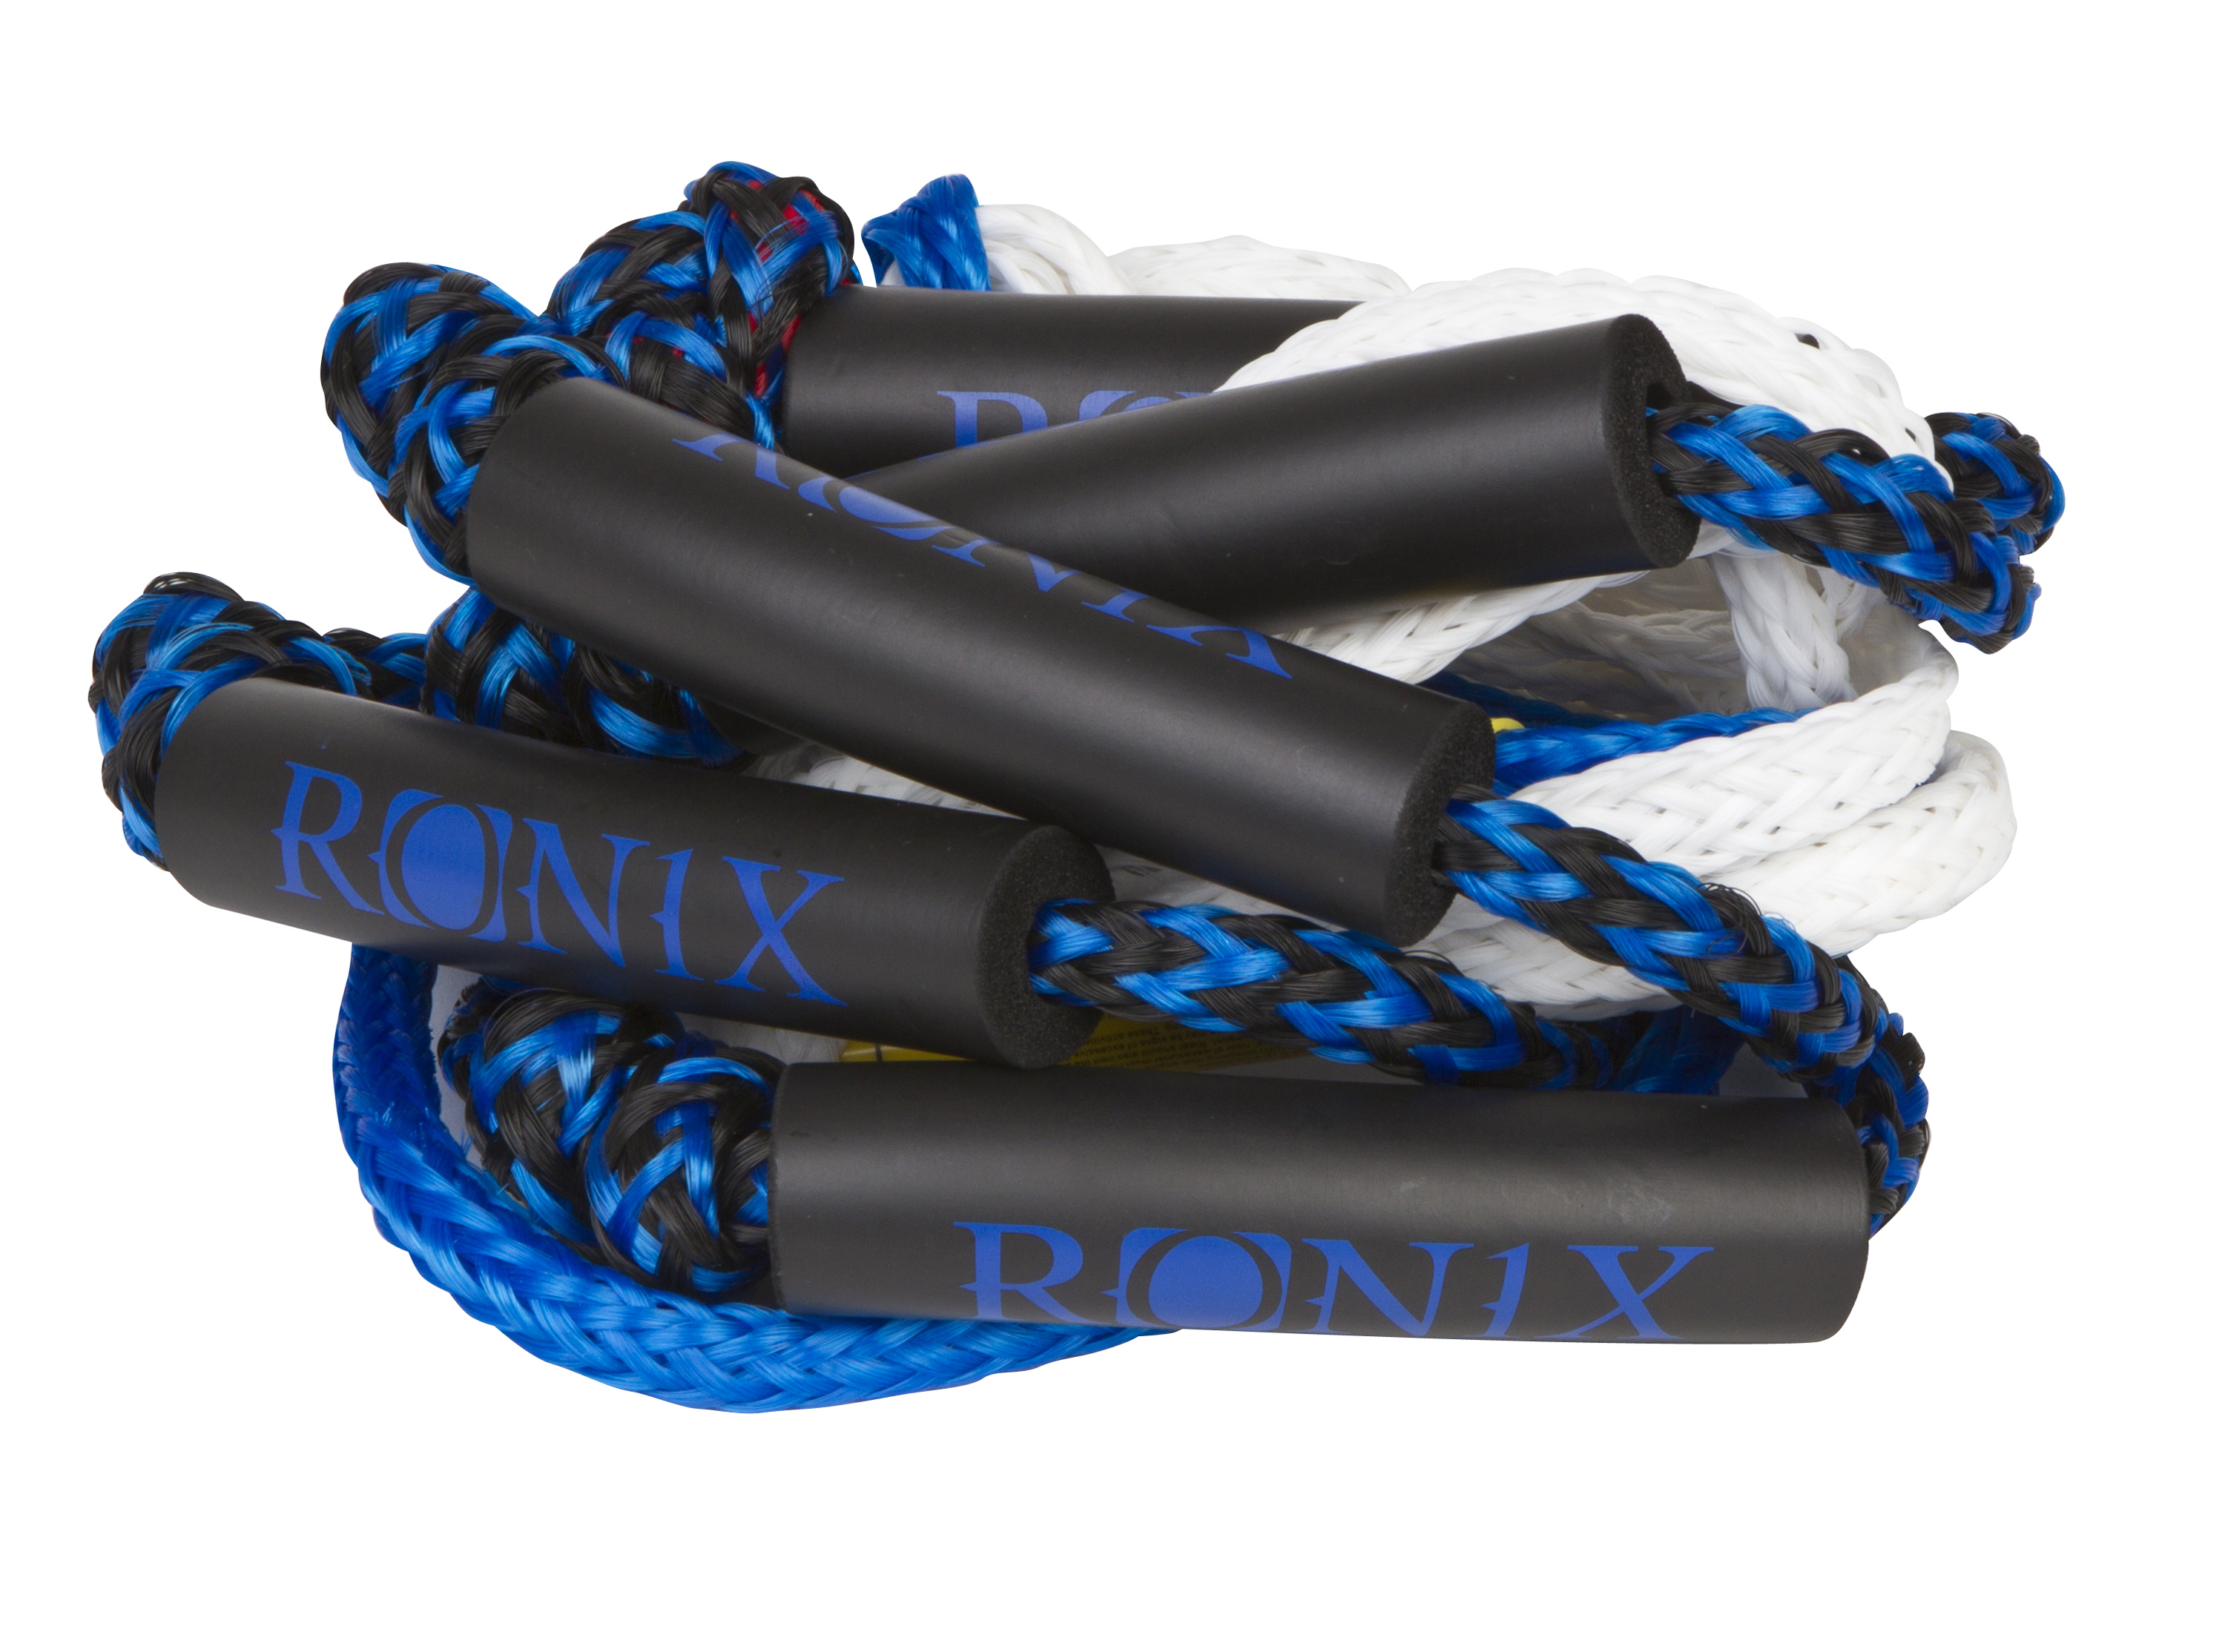   SURF ROPE - NO HANDLE - 25FT 3-BRAIDED SECTIONS RONIX 2017